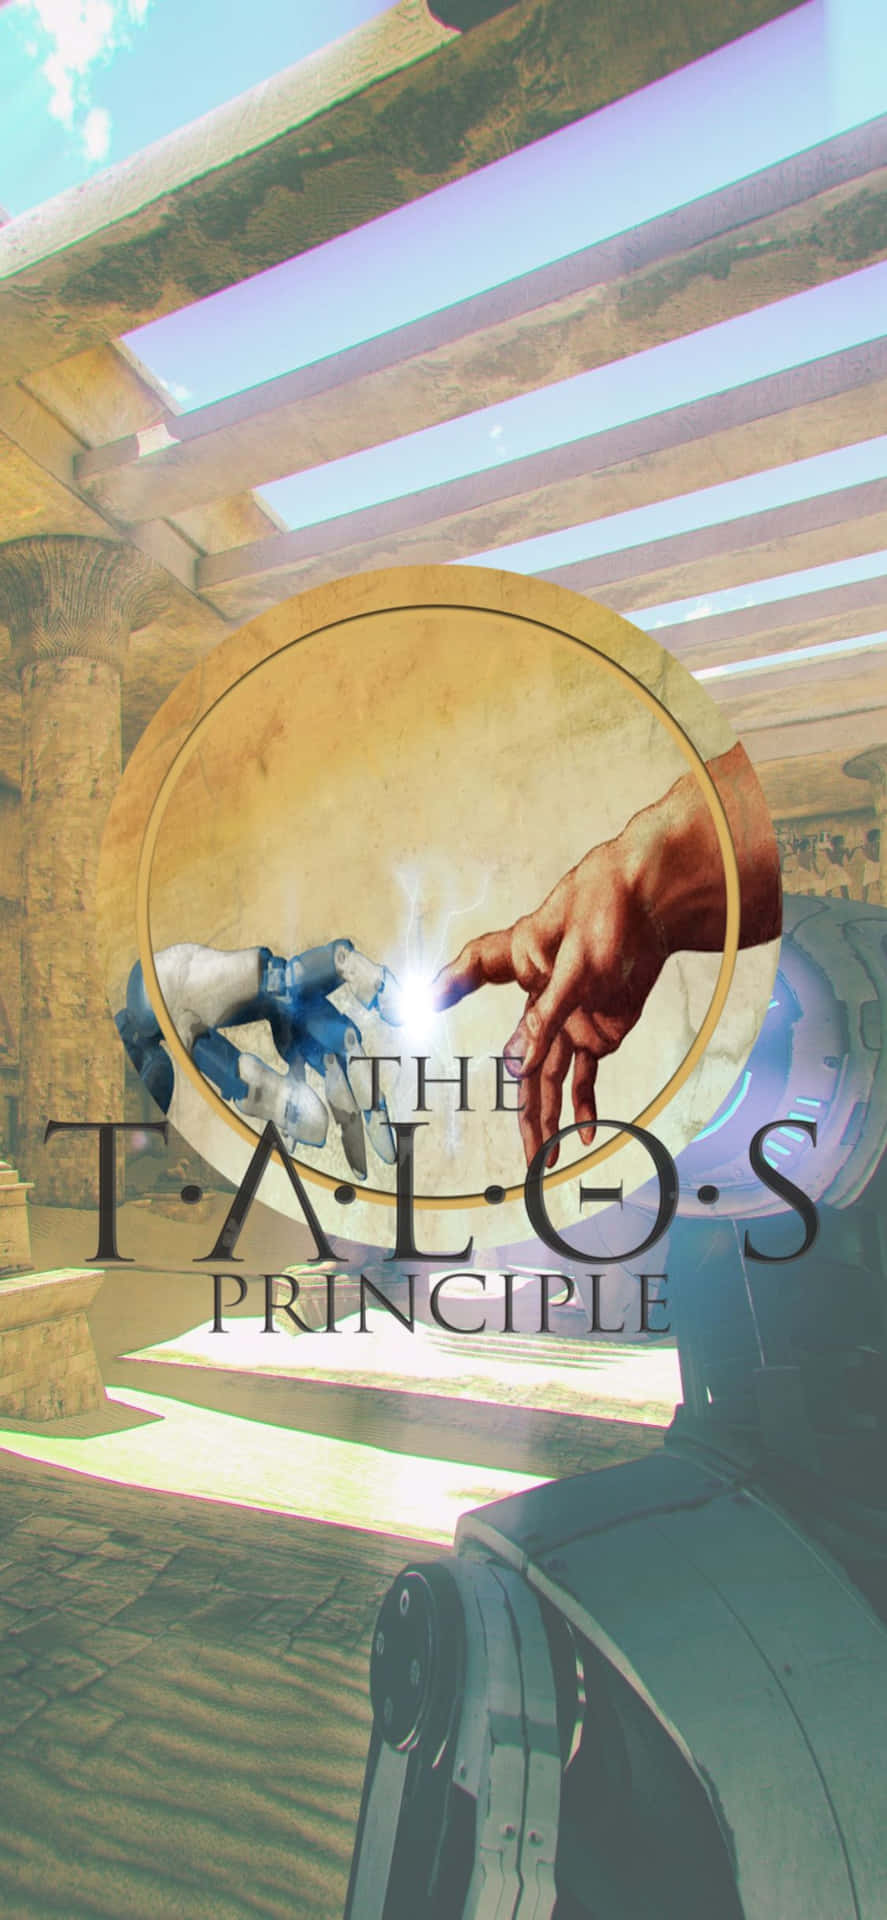 Explore the mysteries of The Talos Principle on iPhone Xs